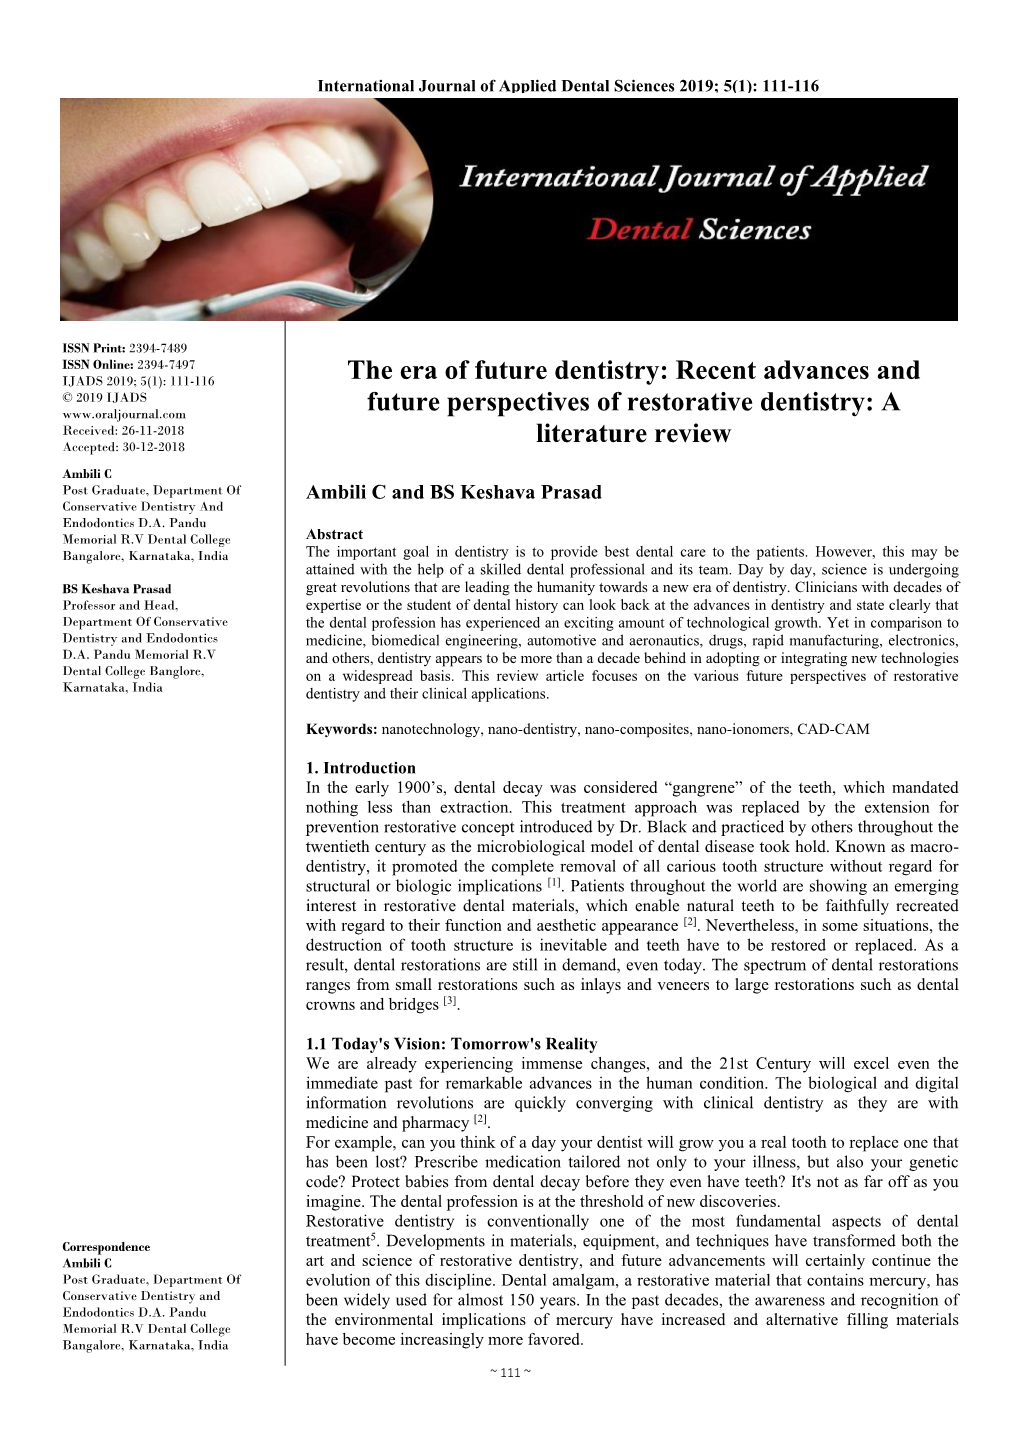 Recent Advances and Future Perspectives of Restorative Dentistry